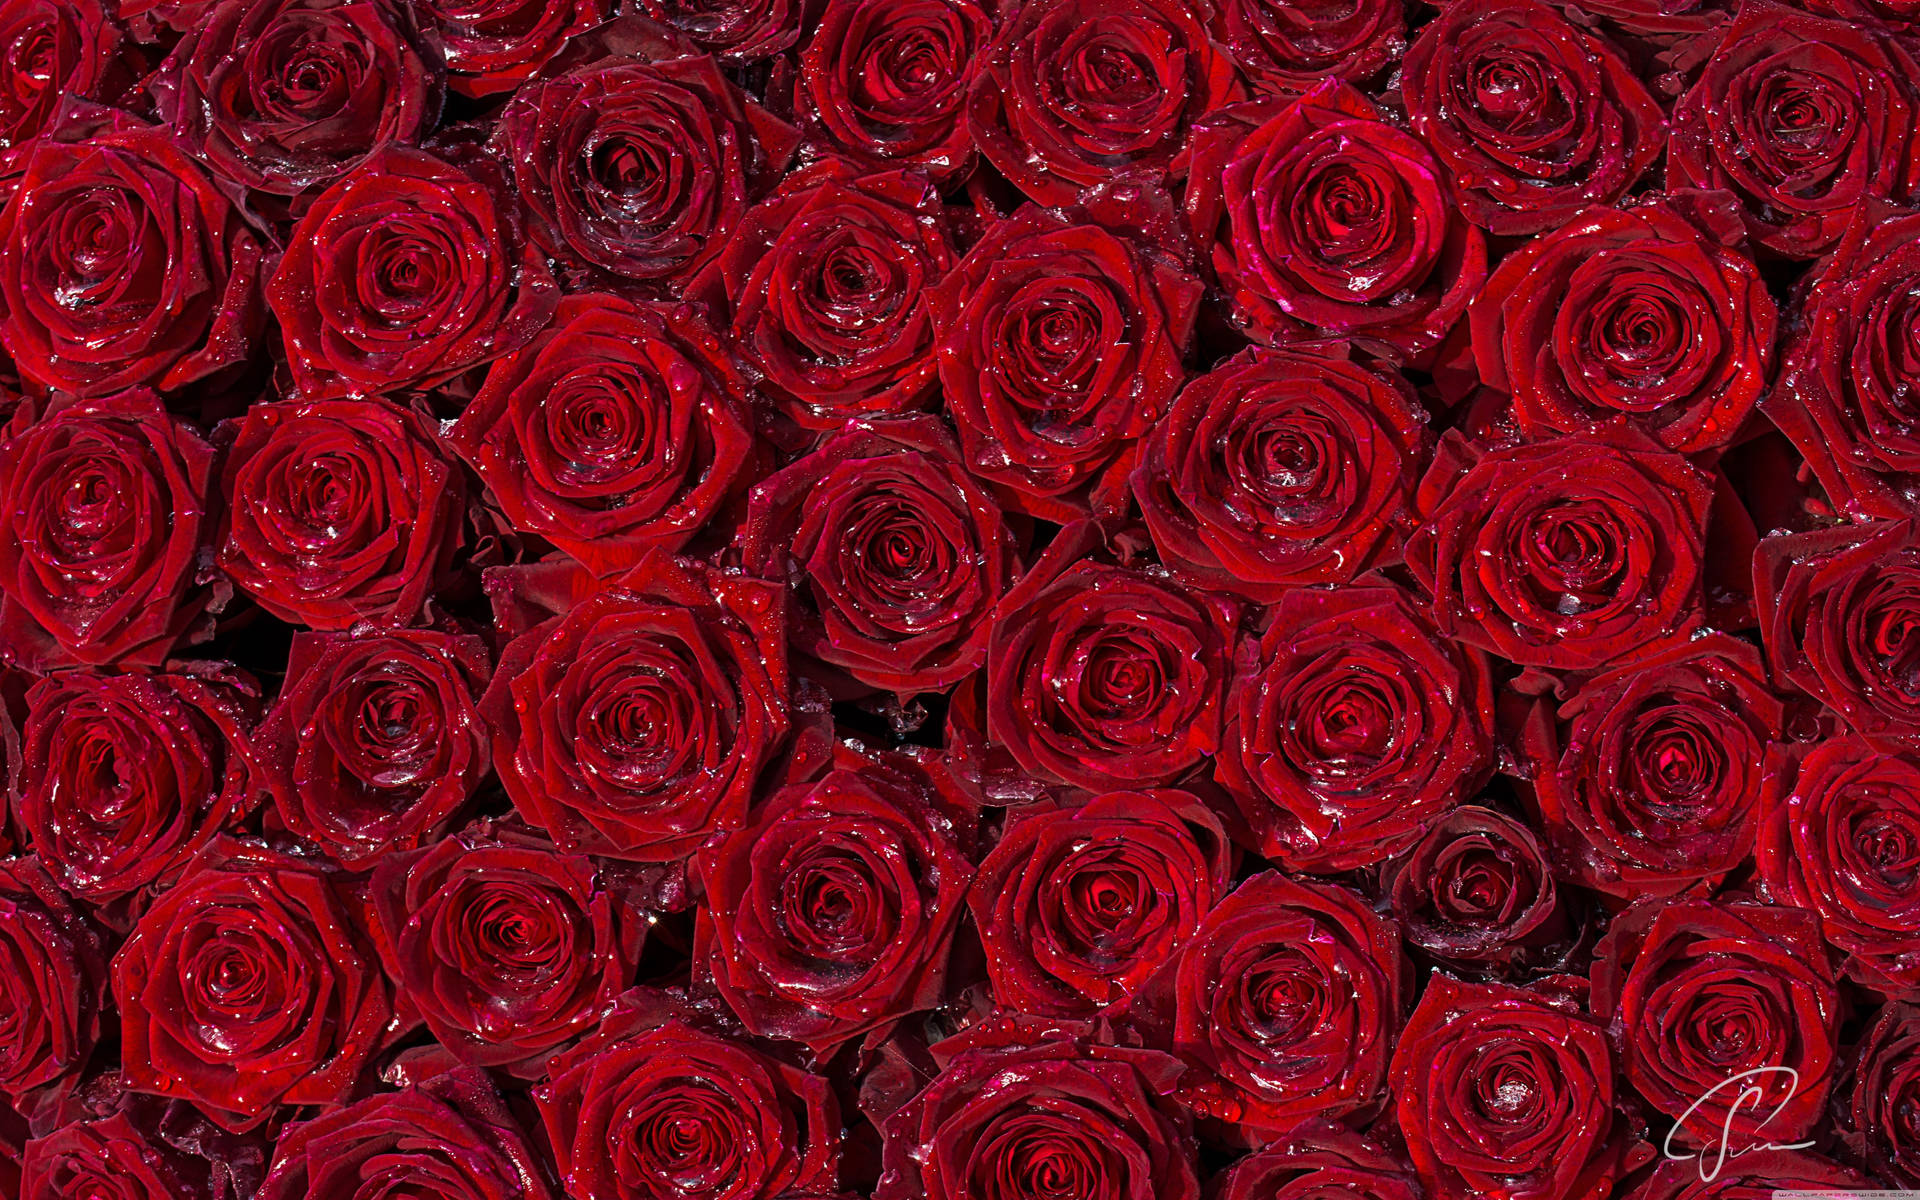 Red Rose Images  Free HD Backgrounds PNGs Vector Graphics Illustrations   Templates  rawpixel